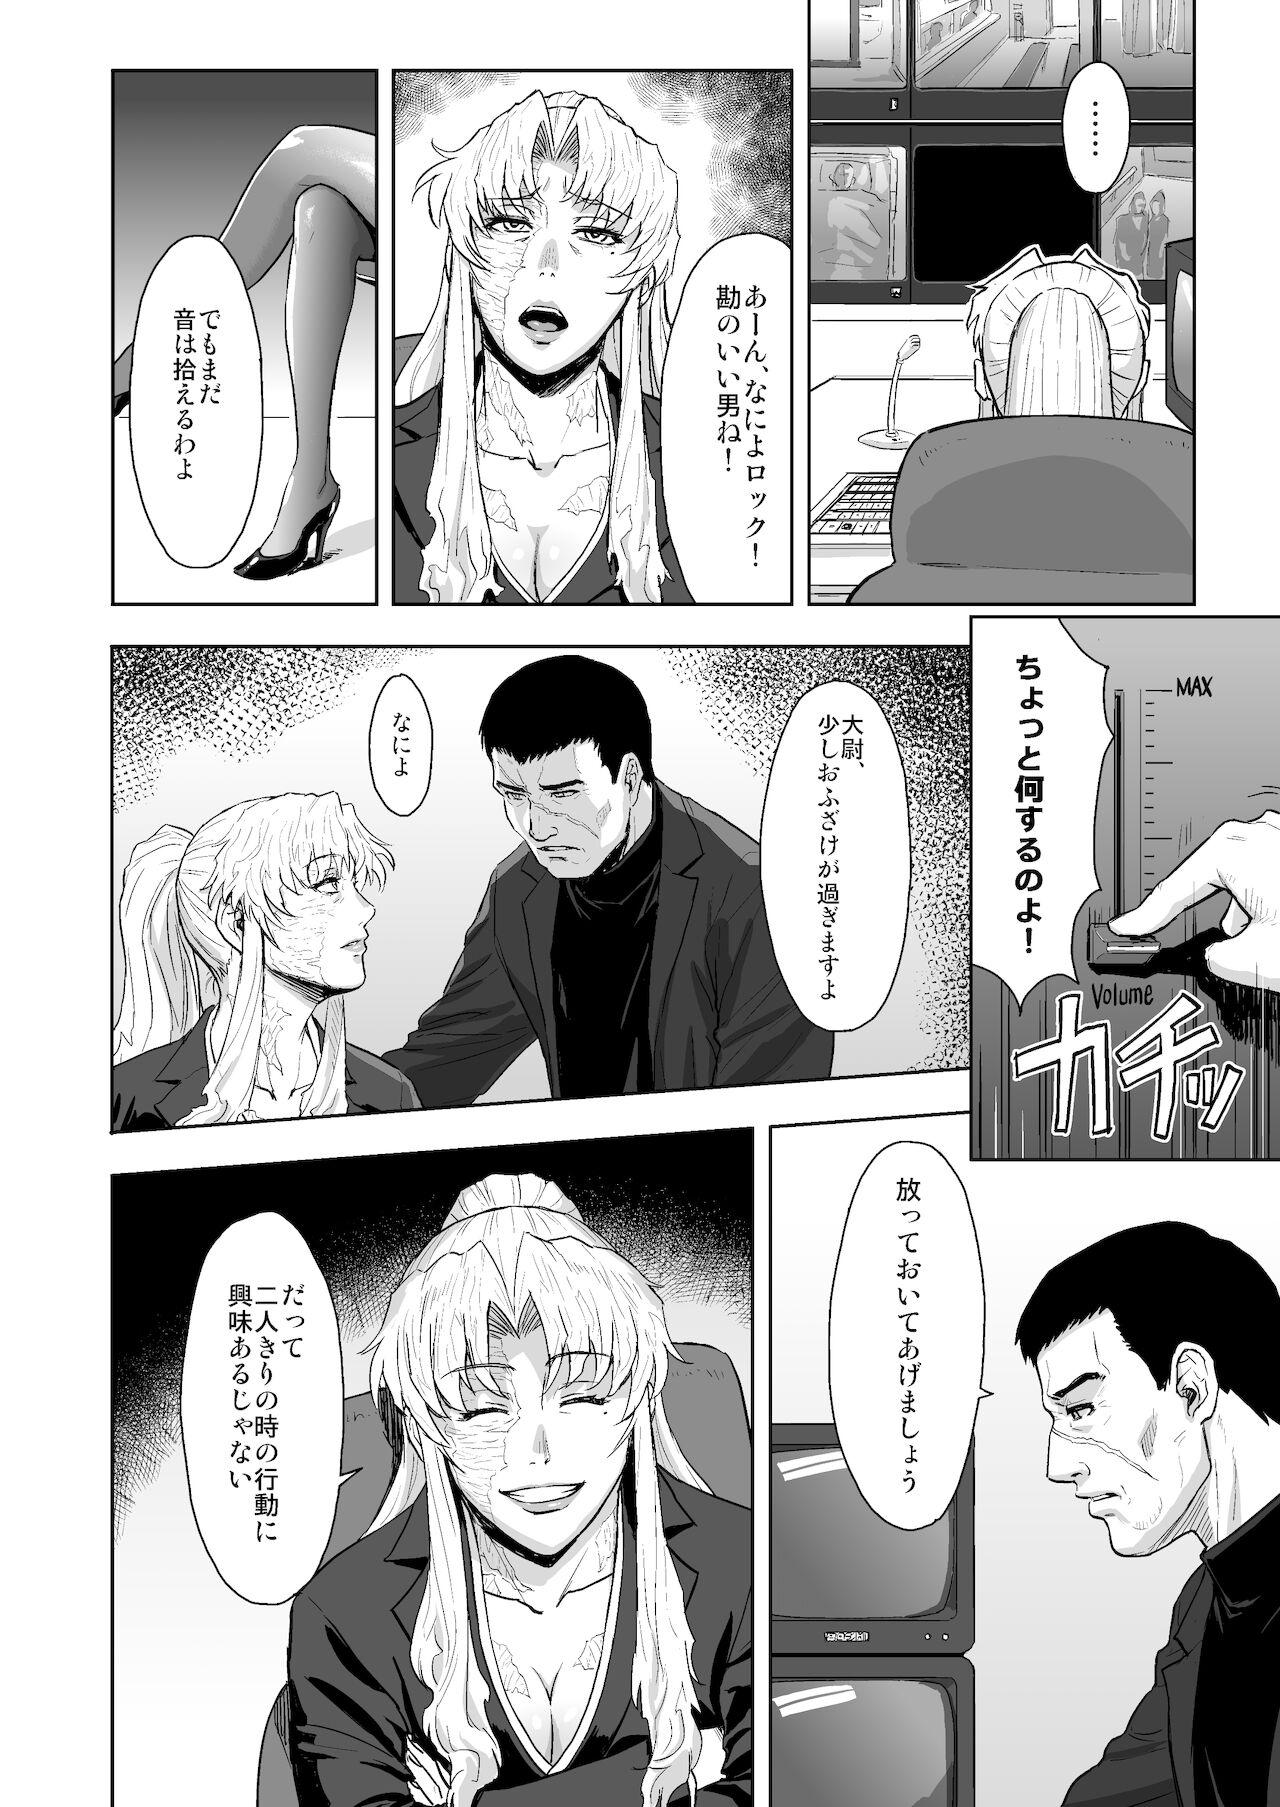 Small Tits Honeoridoku - I can't use my hands - Black lagoon Gay Blondhair - Page 7